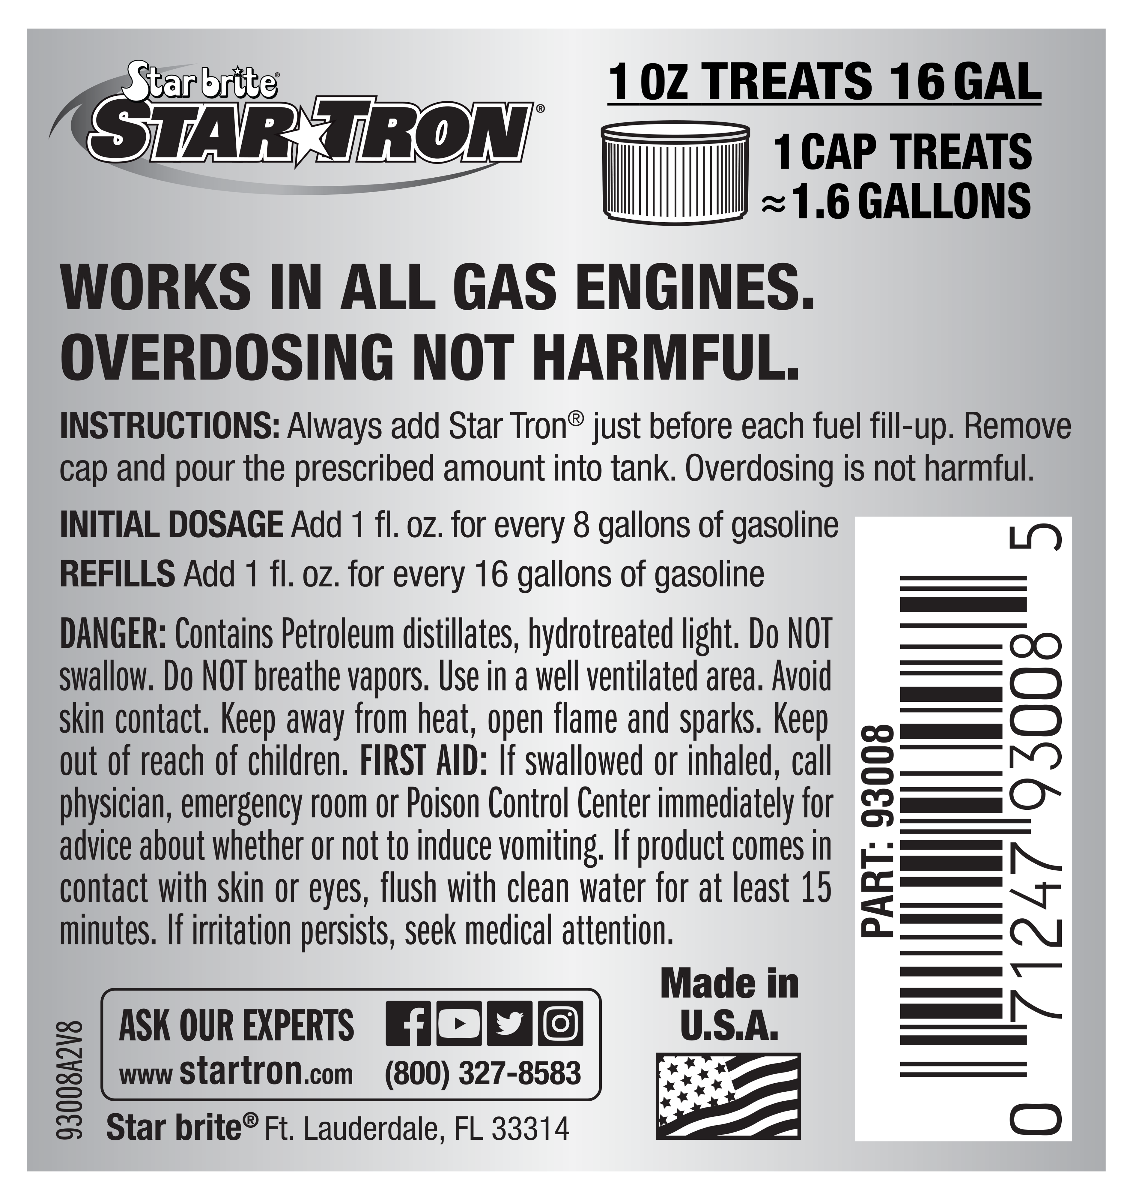 Starbrite - Star Tron Enzyme Fuel Treatment - Concentrated Gas Formula - 1 Gallon - 93000